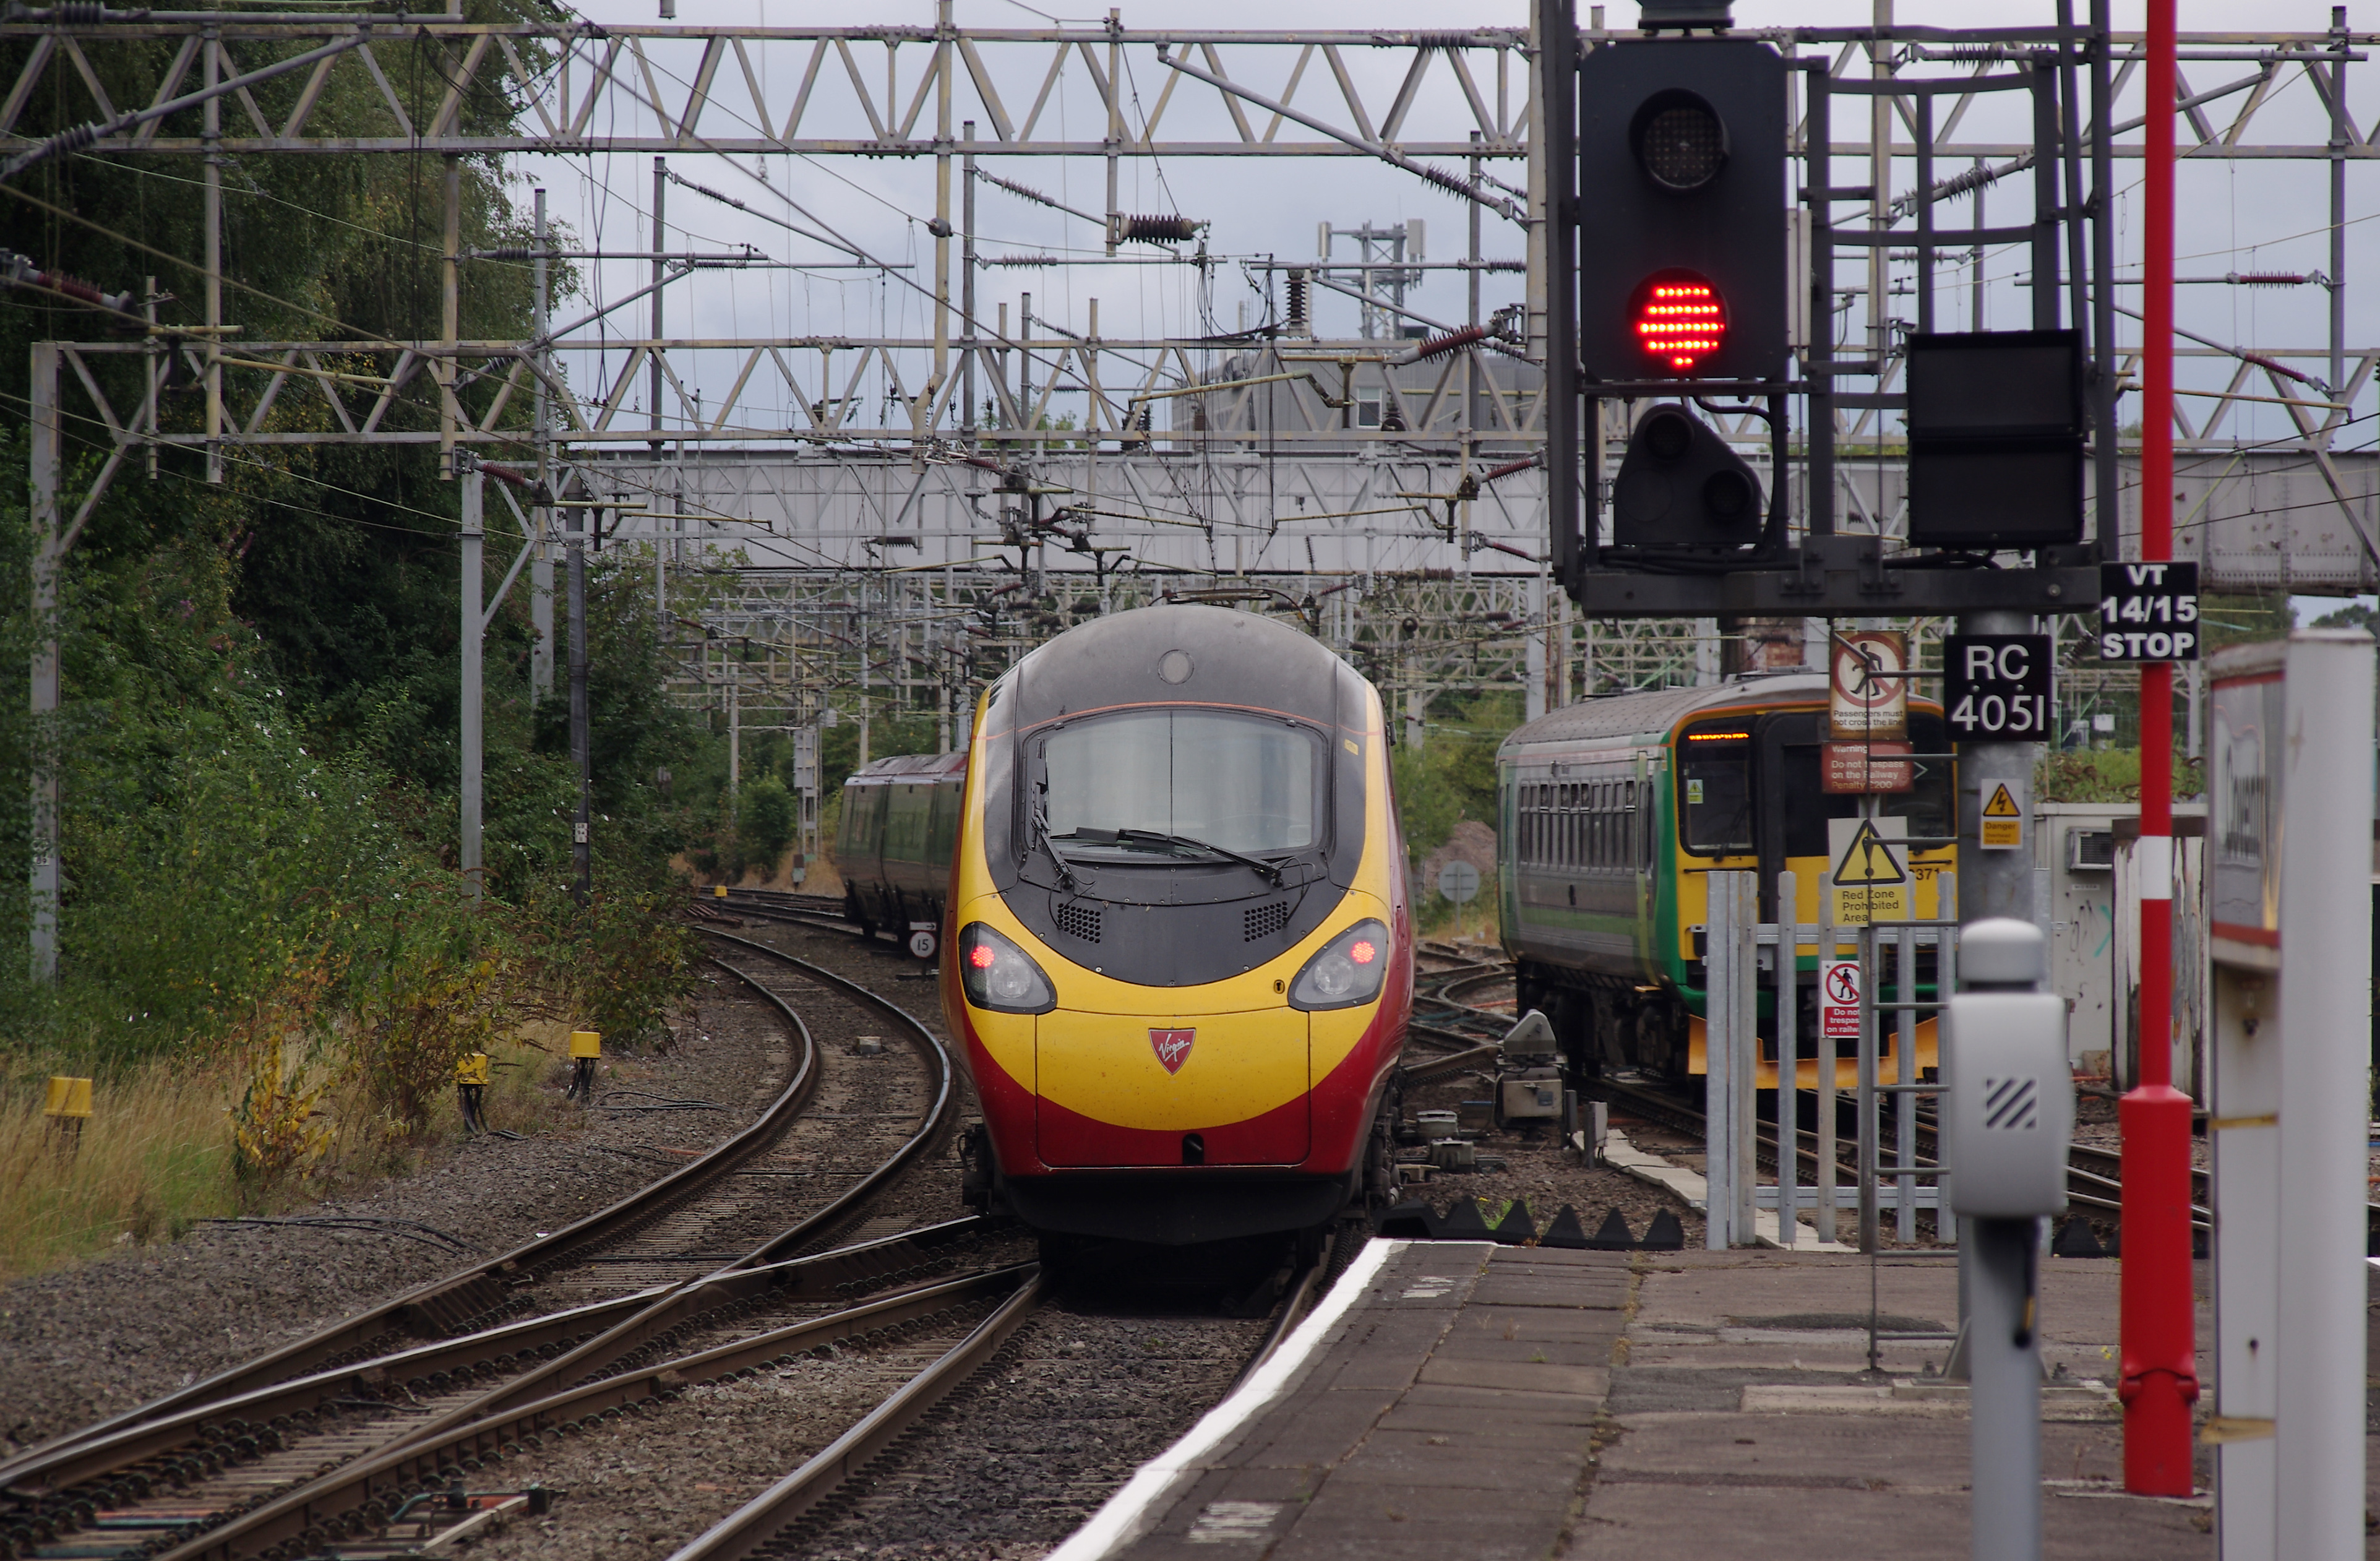 Coventry railway station MMB 17 390014 153371